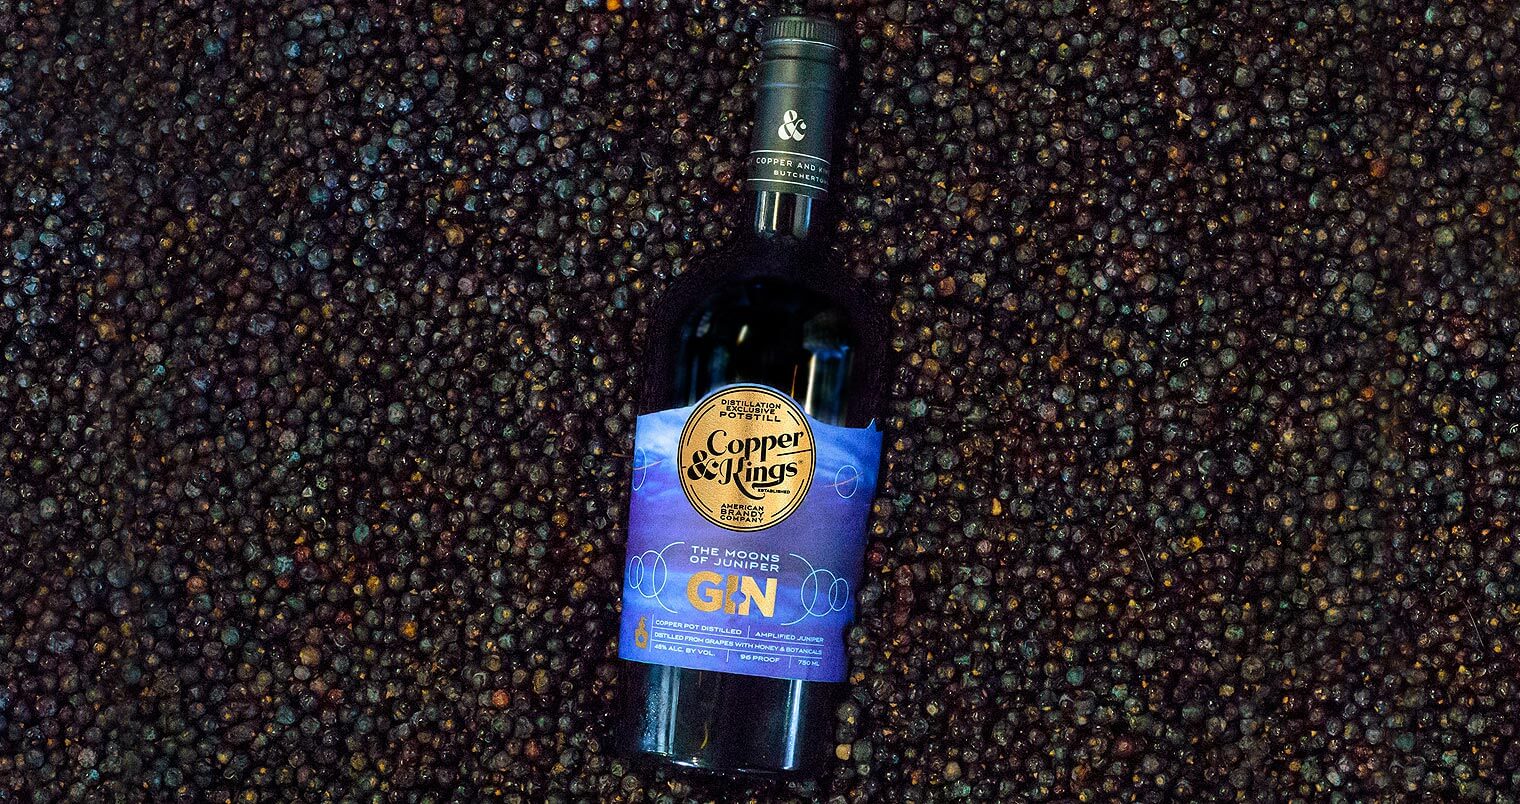 Moons of Juniper Gin, bottle on berries, featured image